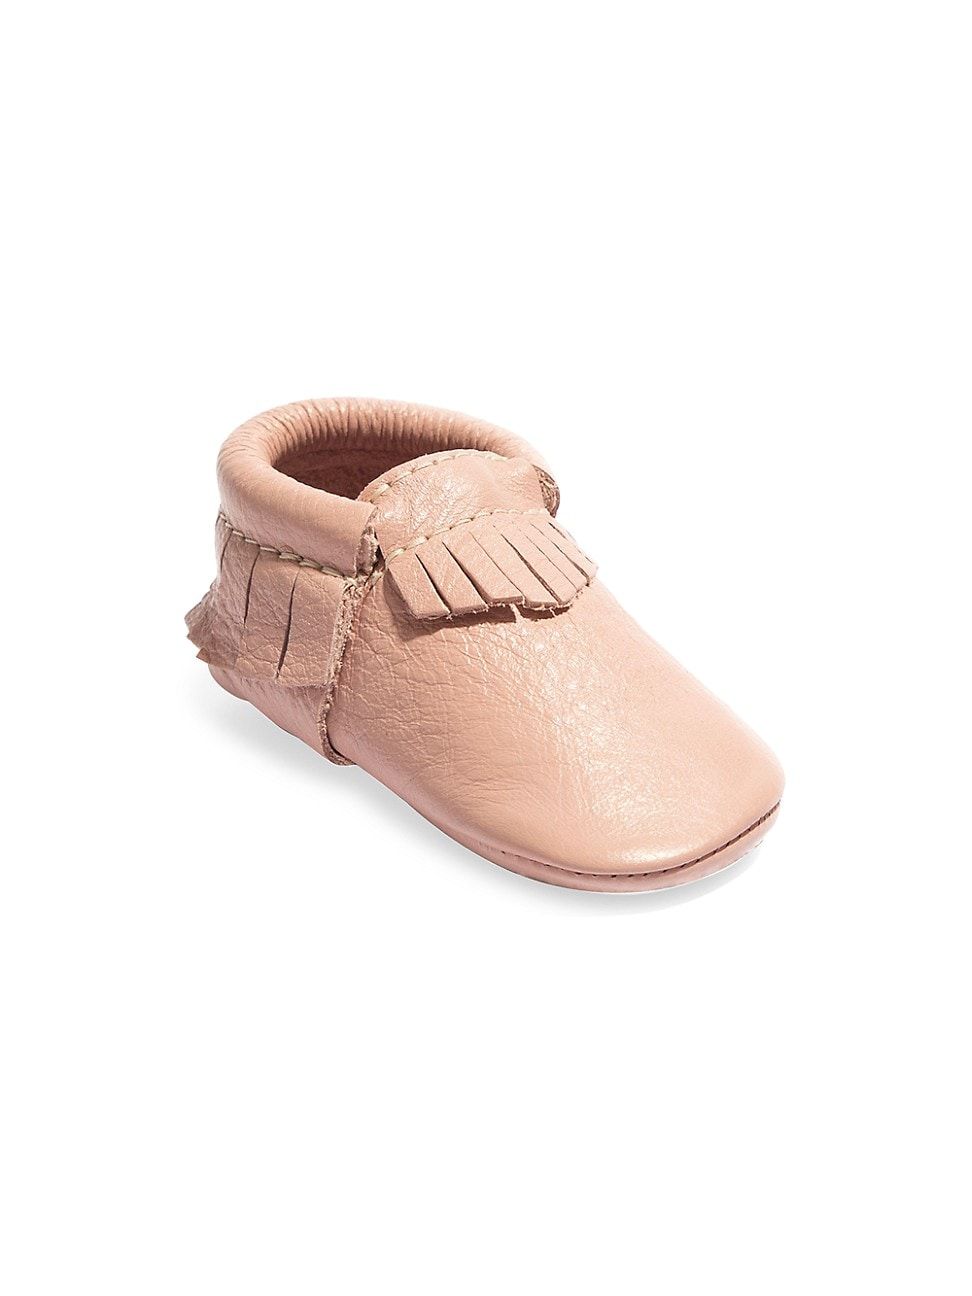 Baby Girl's Classic Leather Soft Sole Moccasins | Saks Fifth Avenue